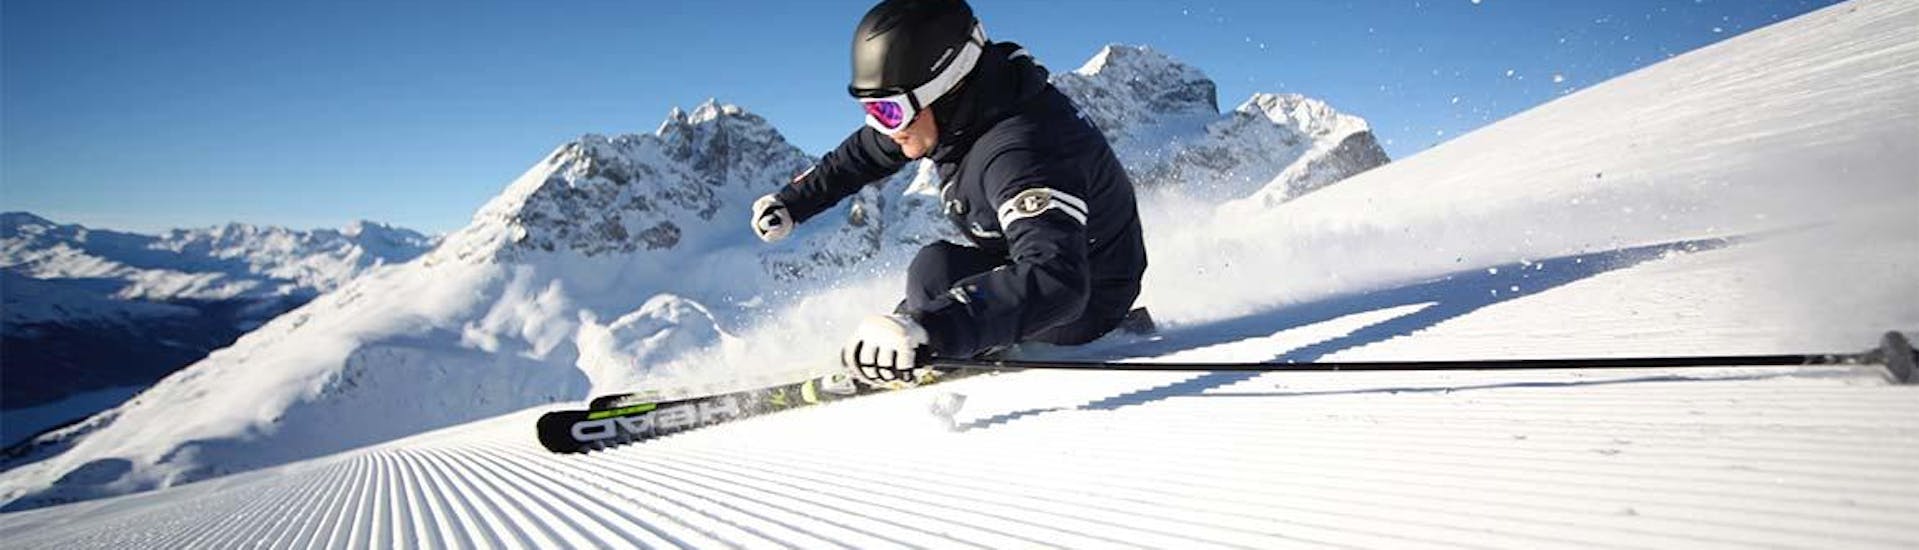 Private Ski Lessons for Adults of All Levels - Full Day with Ski School PassionSki - St. Moritz - Hero image